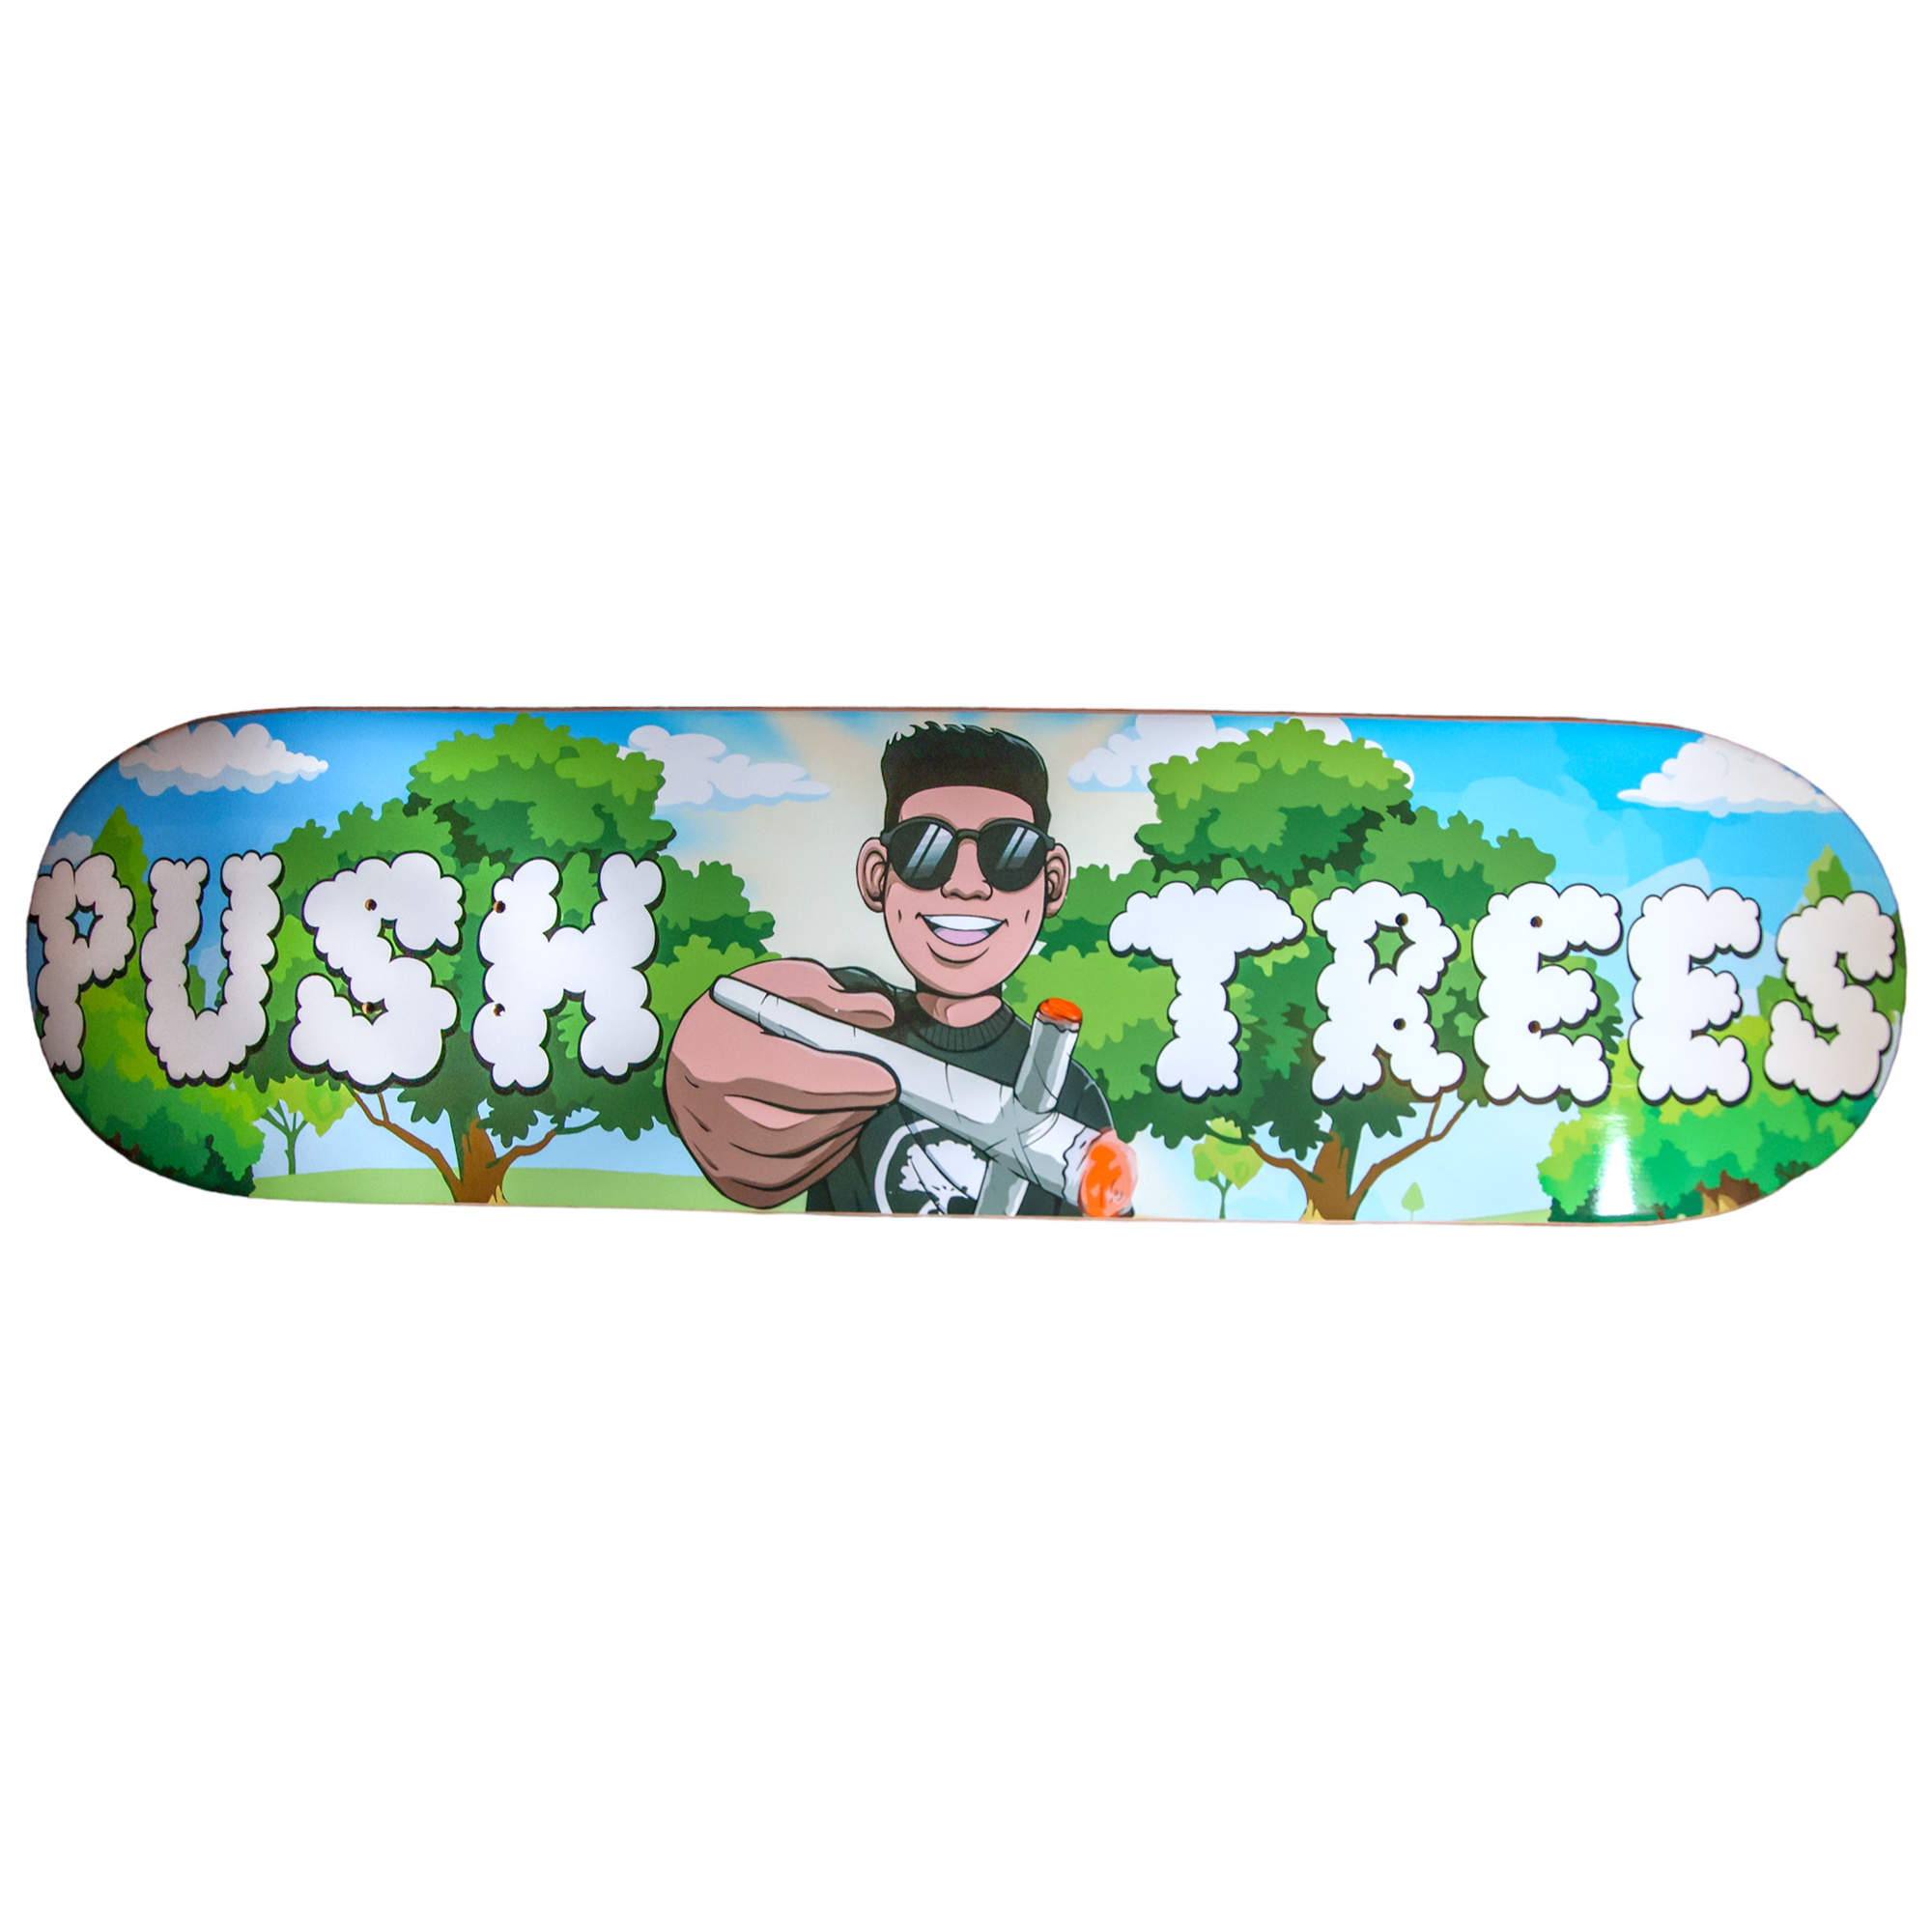 For the Streets Deck